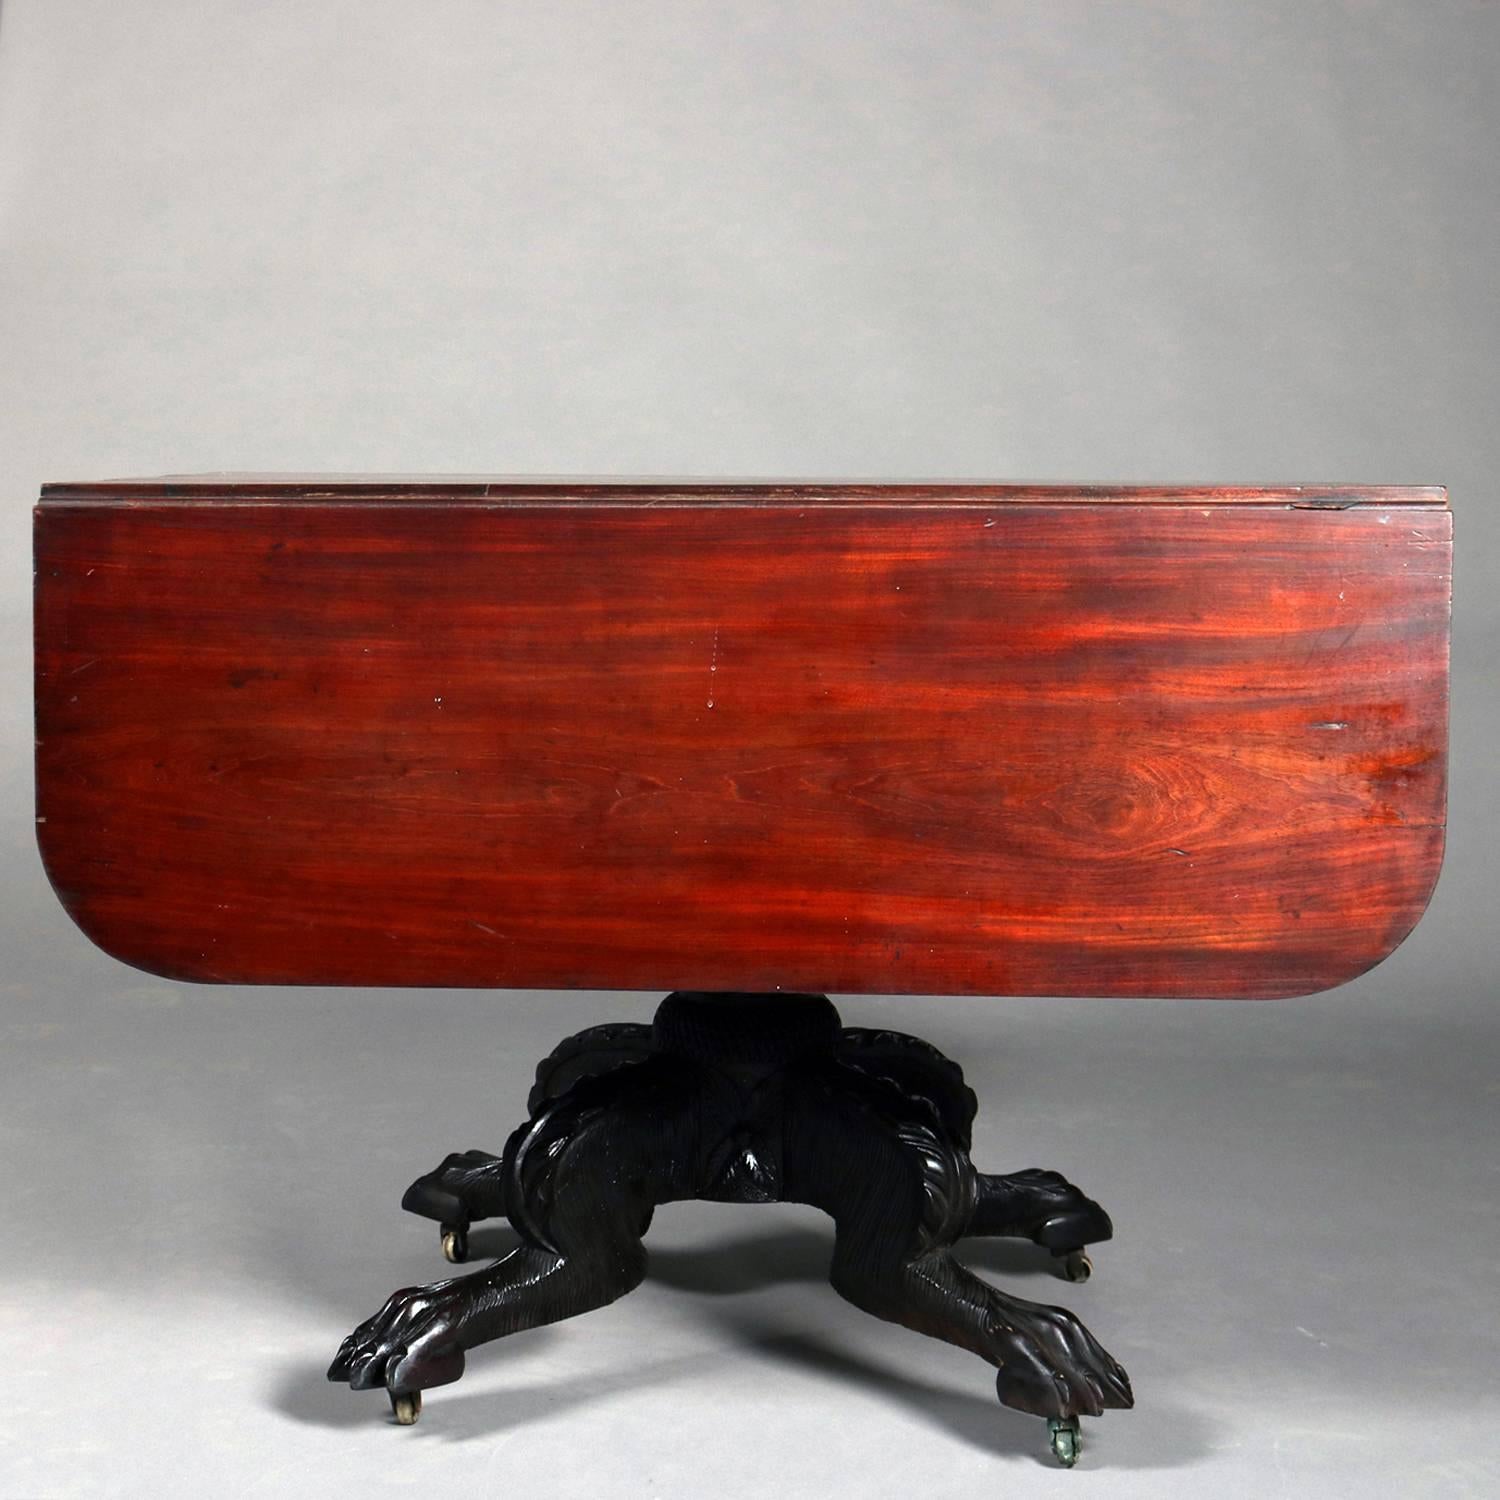 Antique classical Meeks school American Empire flame mahogany drop leaf table features acanthus carved pedestal seated on four fur carved legs terminating in paw feet with casters, circa 1840.

Measures: 28